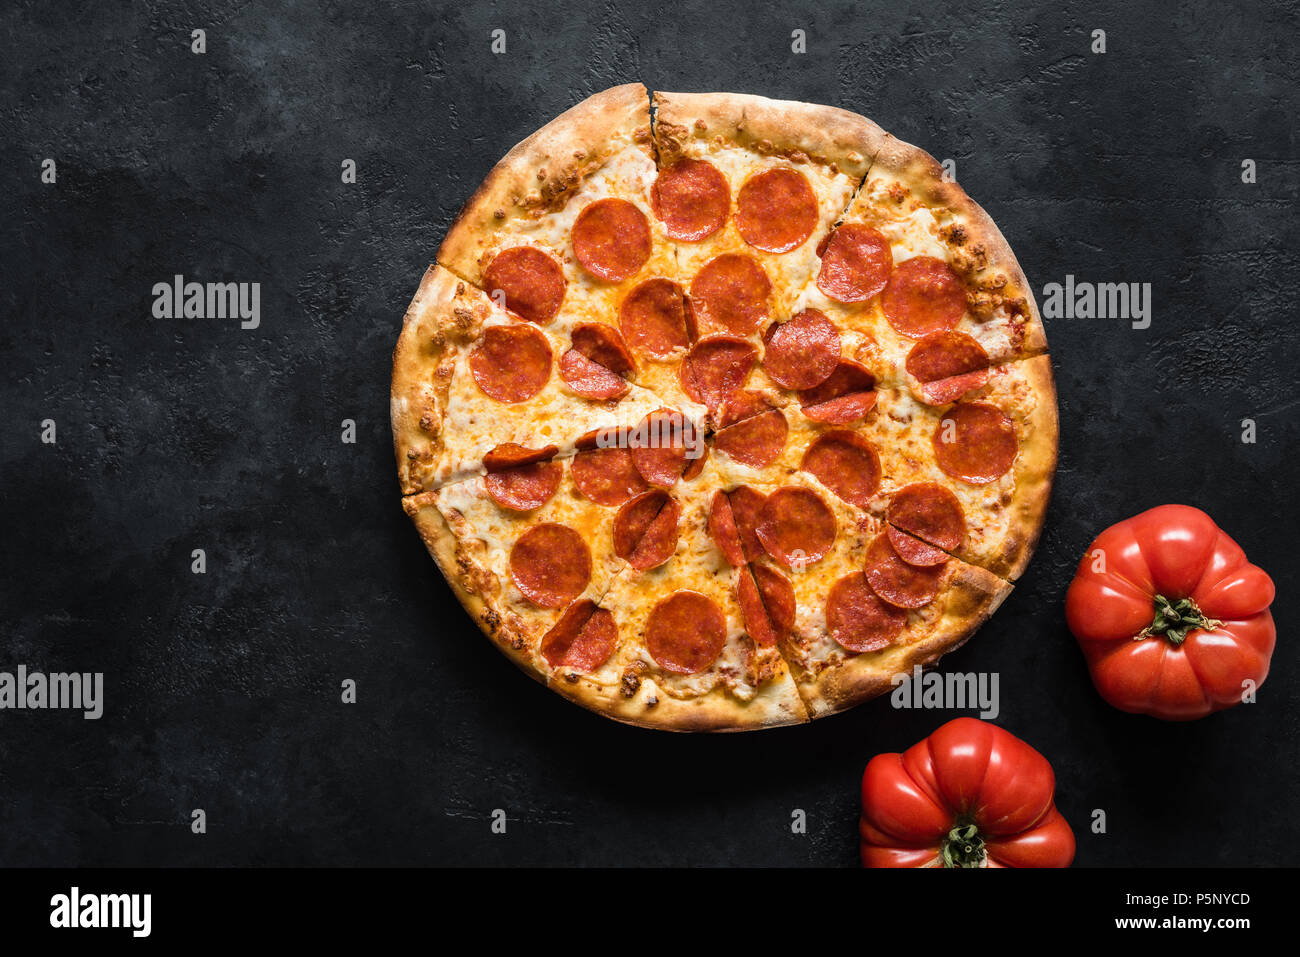 Pepperoni pizza on black concrete background. American pepperoni pizza, top view Stock Photo